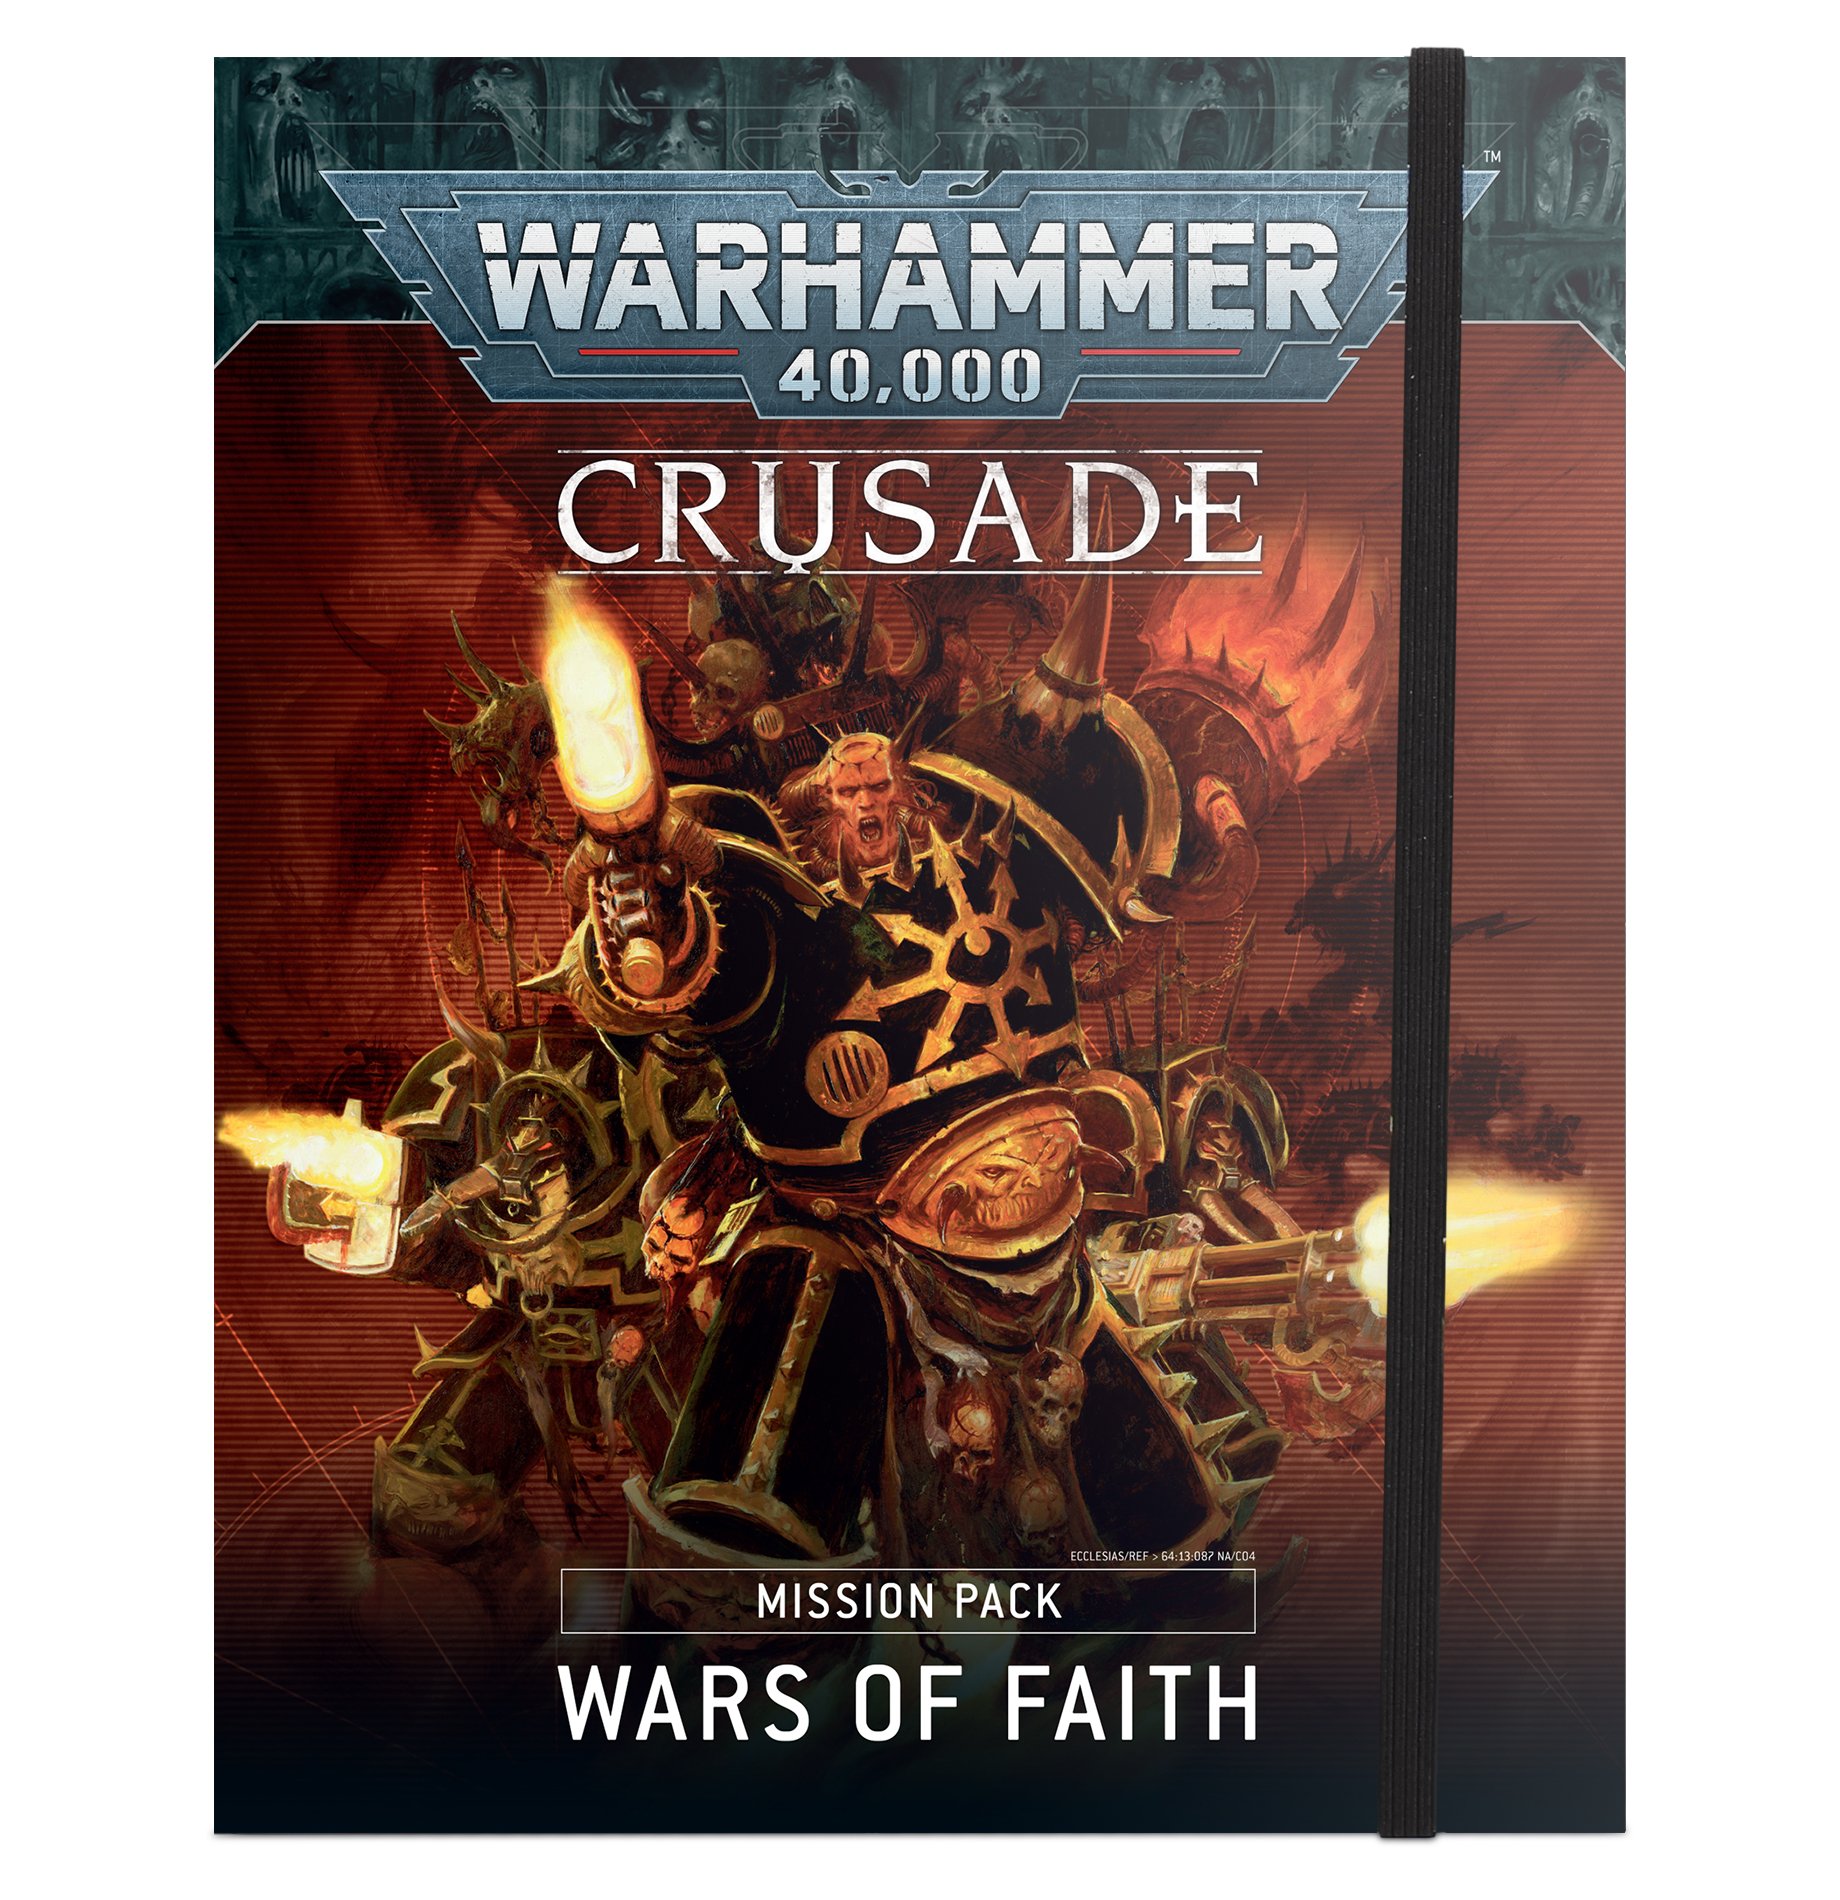 Warhammer 40,000: Crusade Mission Pack: Wars of Faith  